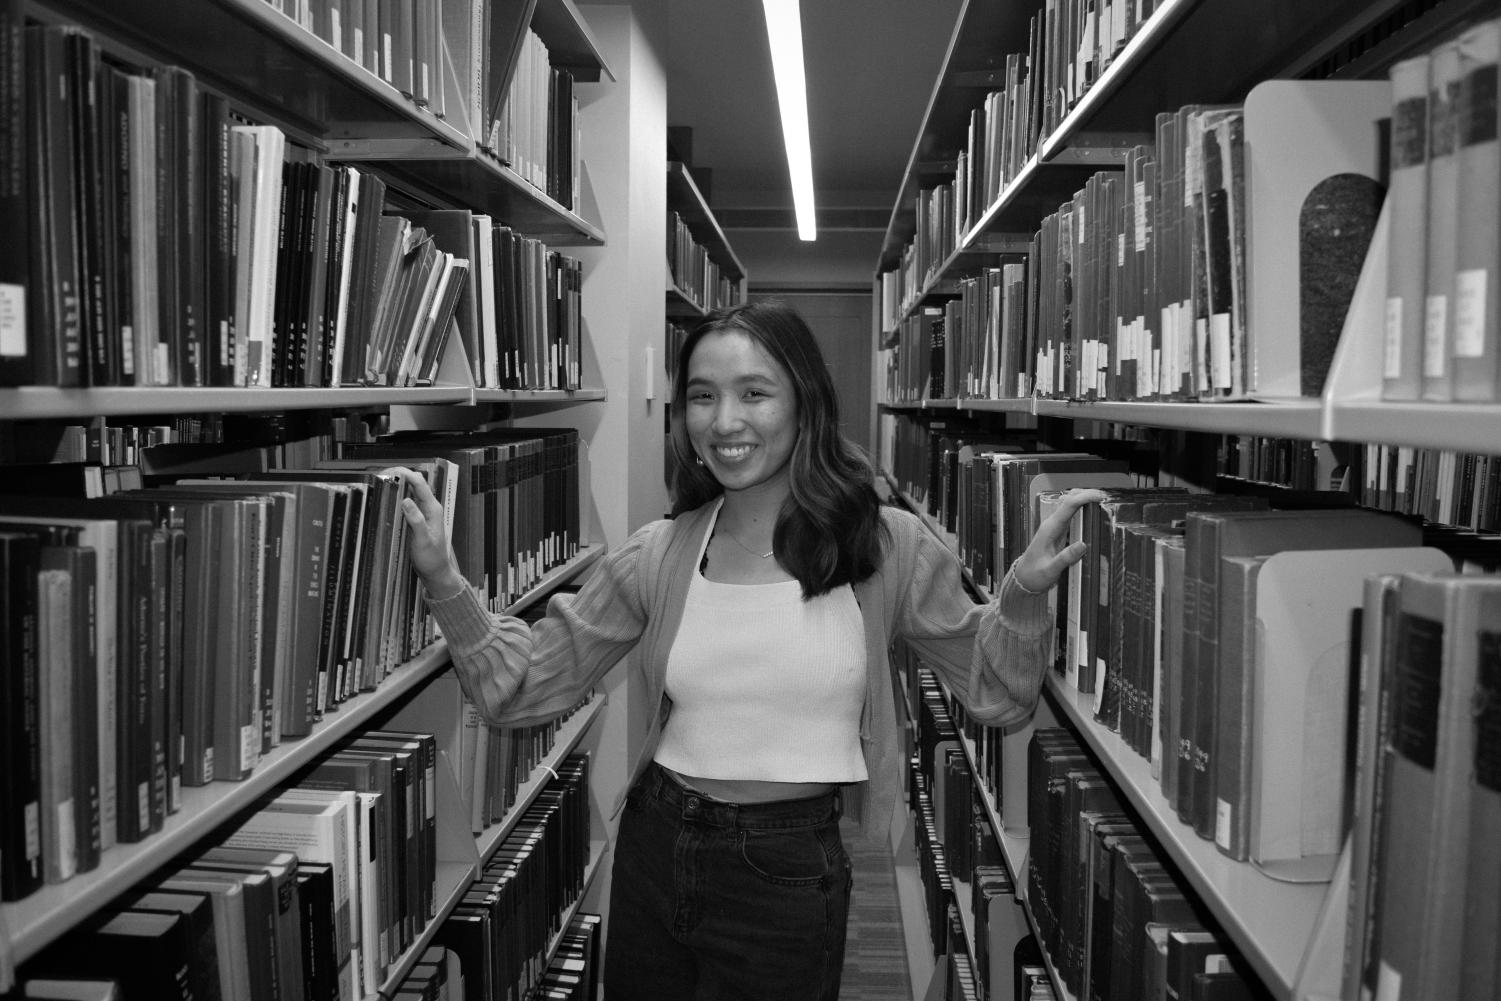 A black-and-white image of a female college student with medium-length slightly wavy dark hair, a light crop top, dark jeans, and a light cardigan smiling at the camera stands in between two bookshelves. Both her hands are placed on books on either side of the shelves.